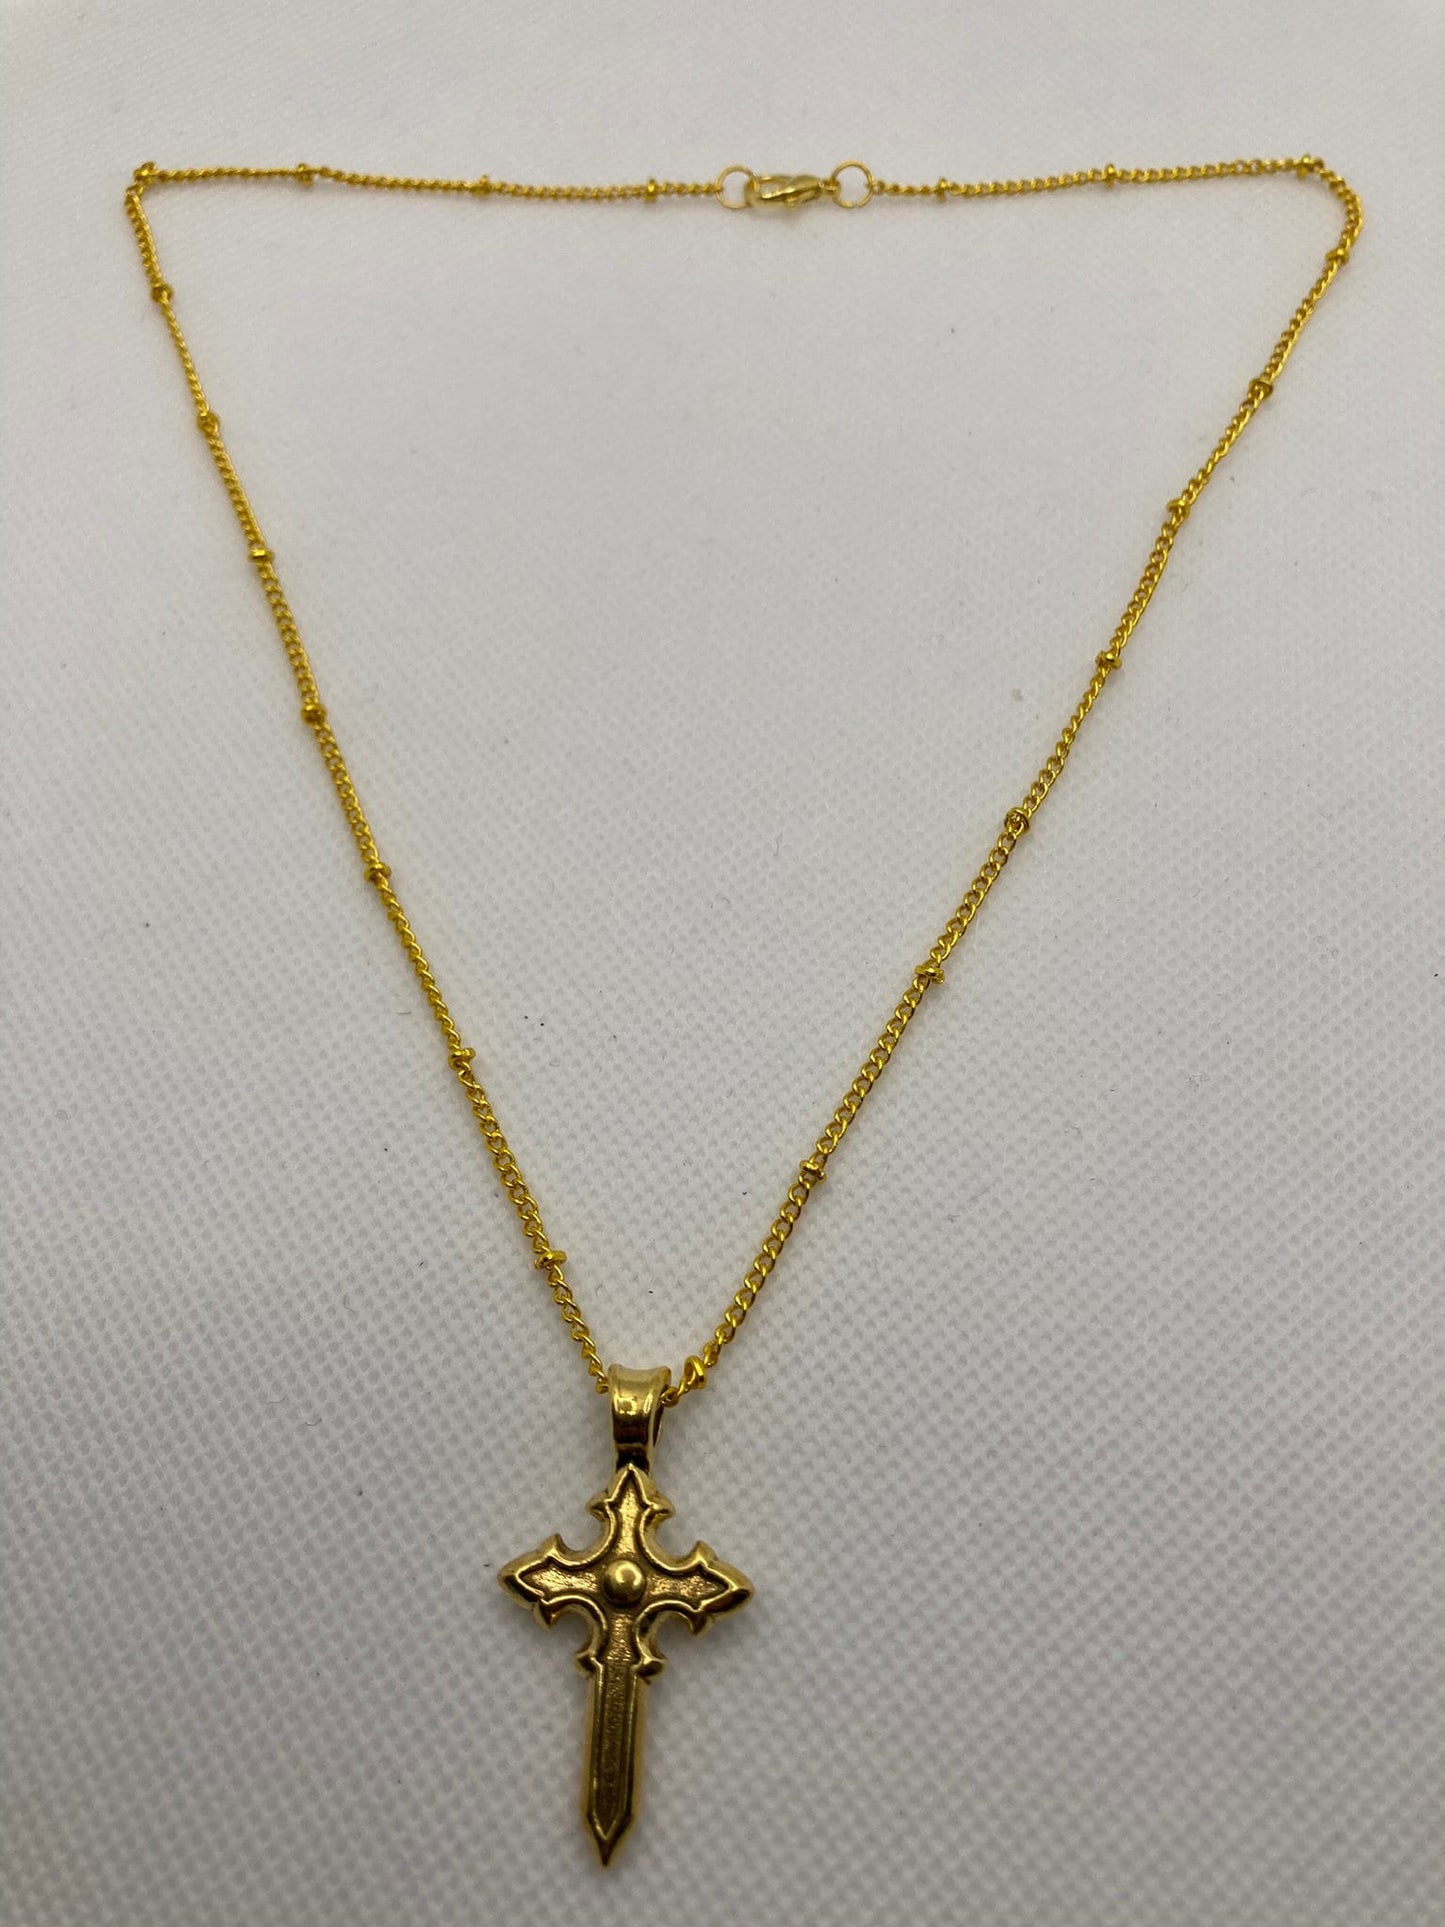 Gold Tone Cross Necklace with Specialty Chain, Southwest, Religious and Country Jewelry Style 3